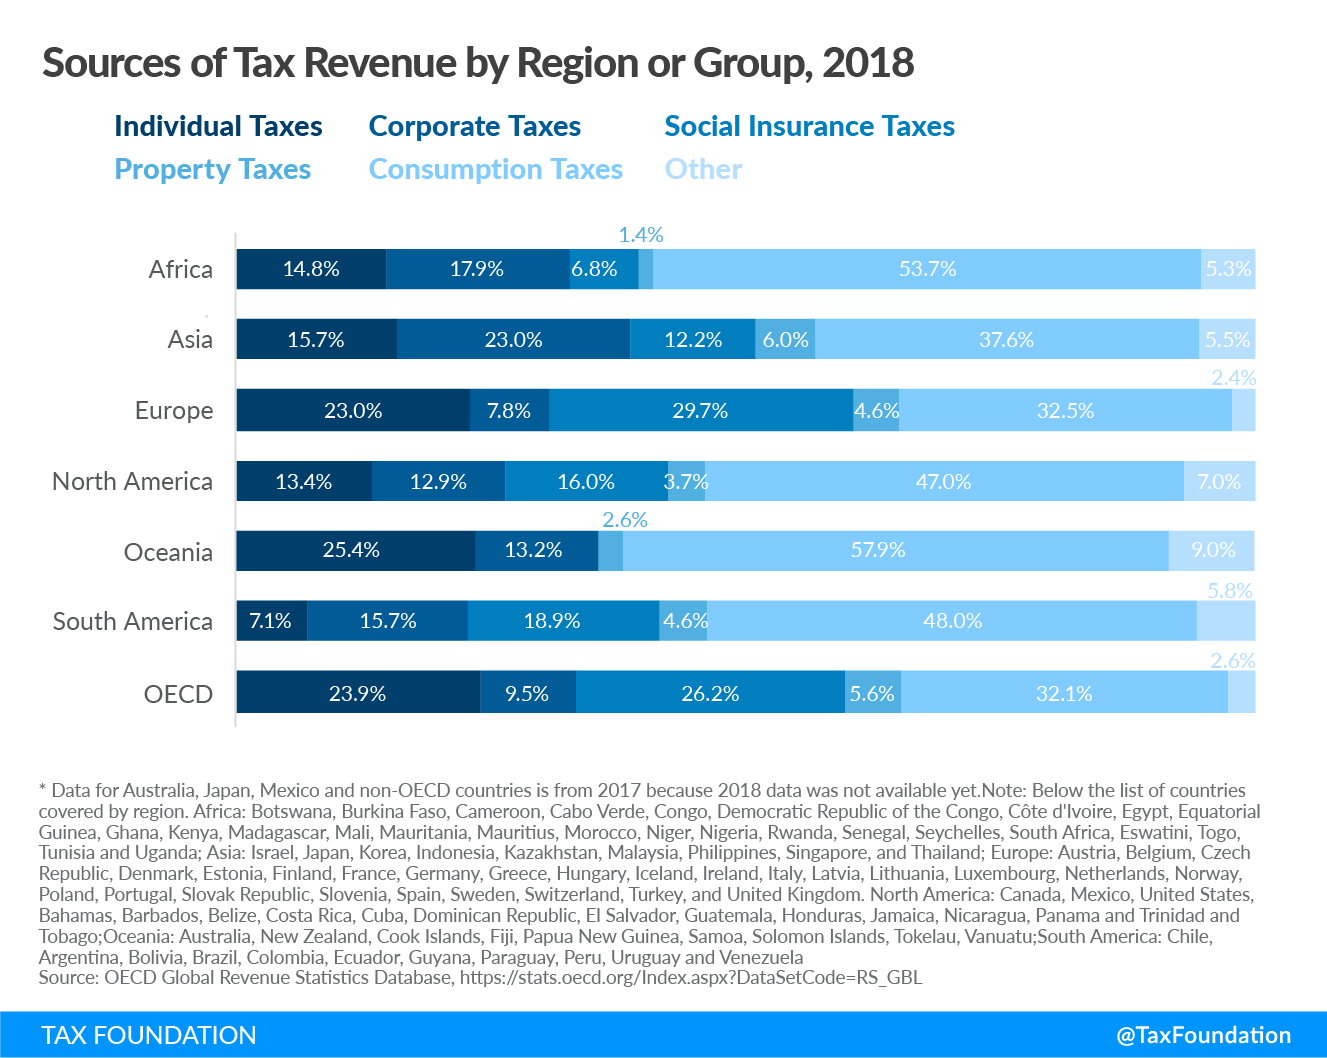 Sources of Tax Revenue by Region or Group 2018